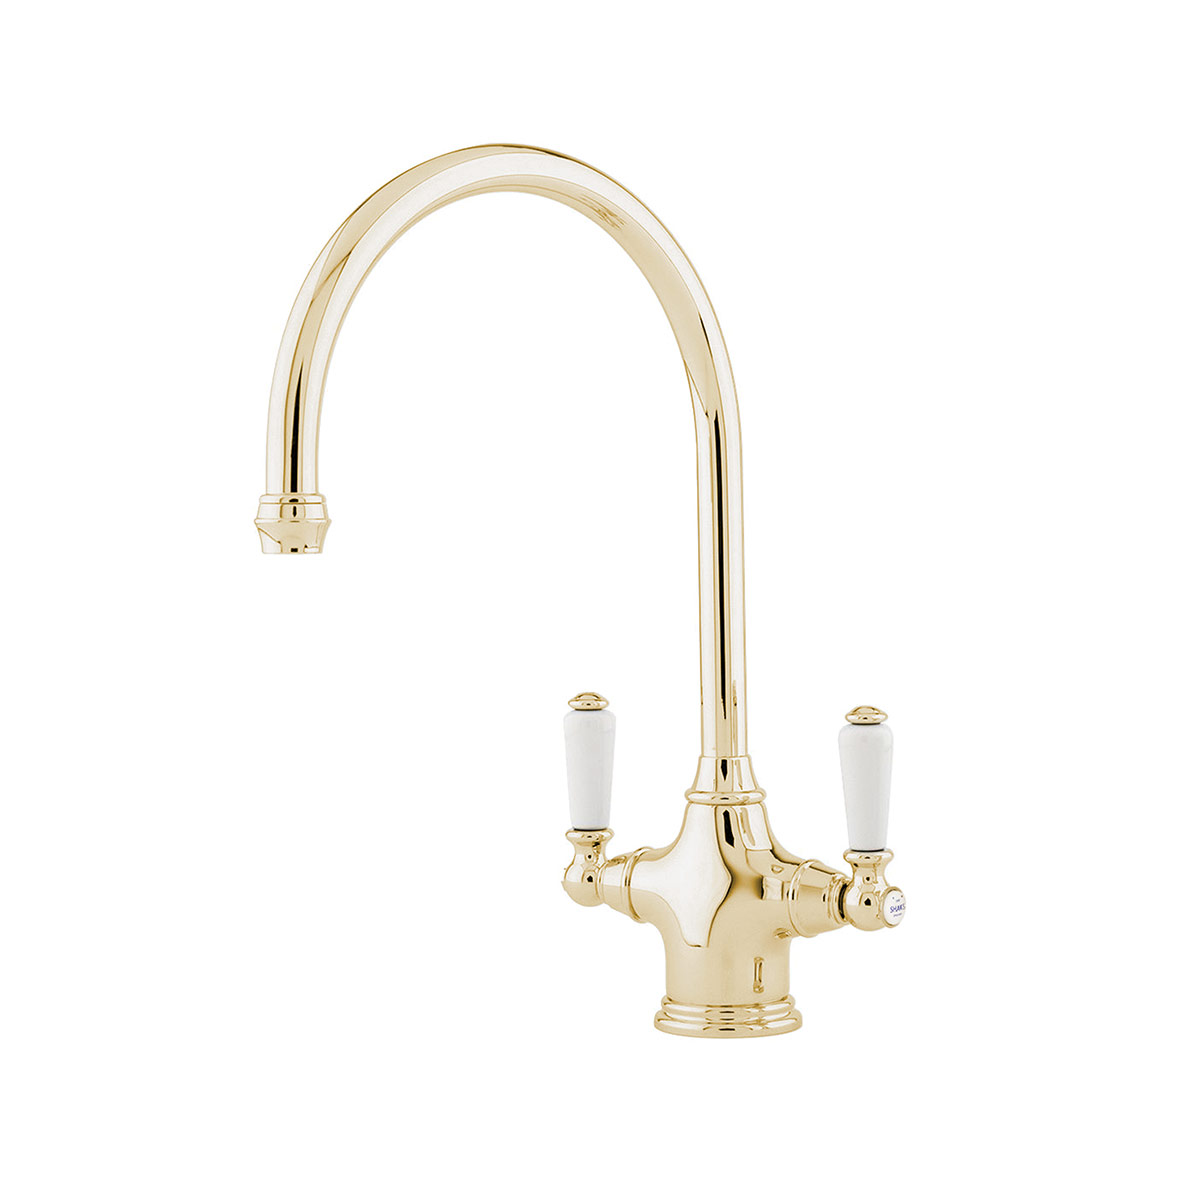 Shaws by Perrin & Rowe Ribble kitchen mixer in Gold (special order). Phoenician style monobloc kitchen tap AUSH.4460. Distributed in Australia by Luxe by Design, Brisbane.